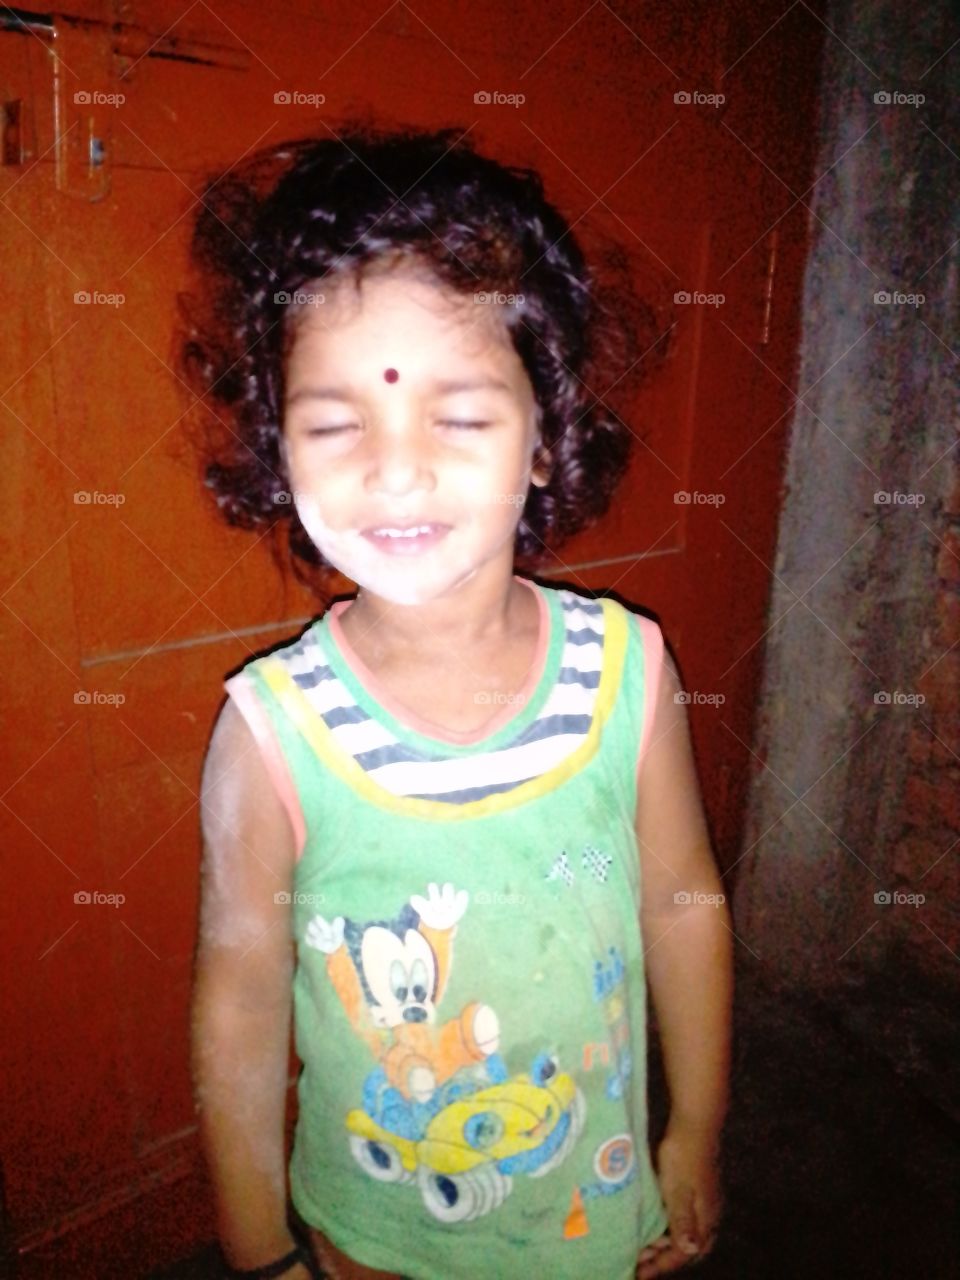 child paste oat on his face